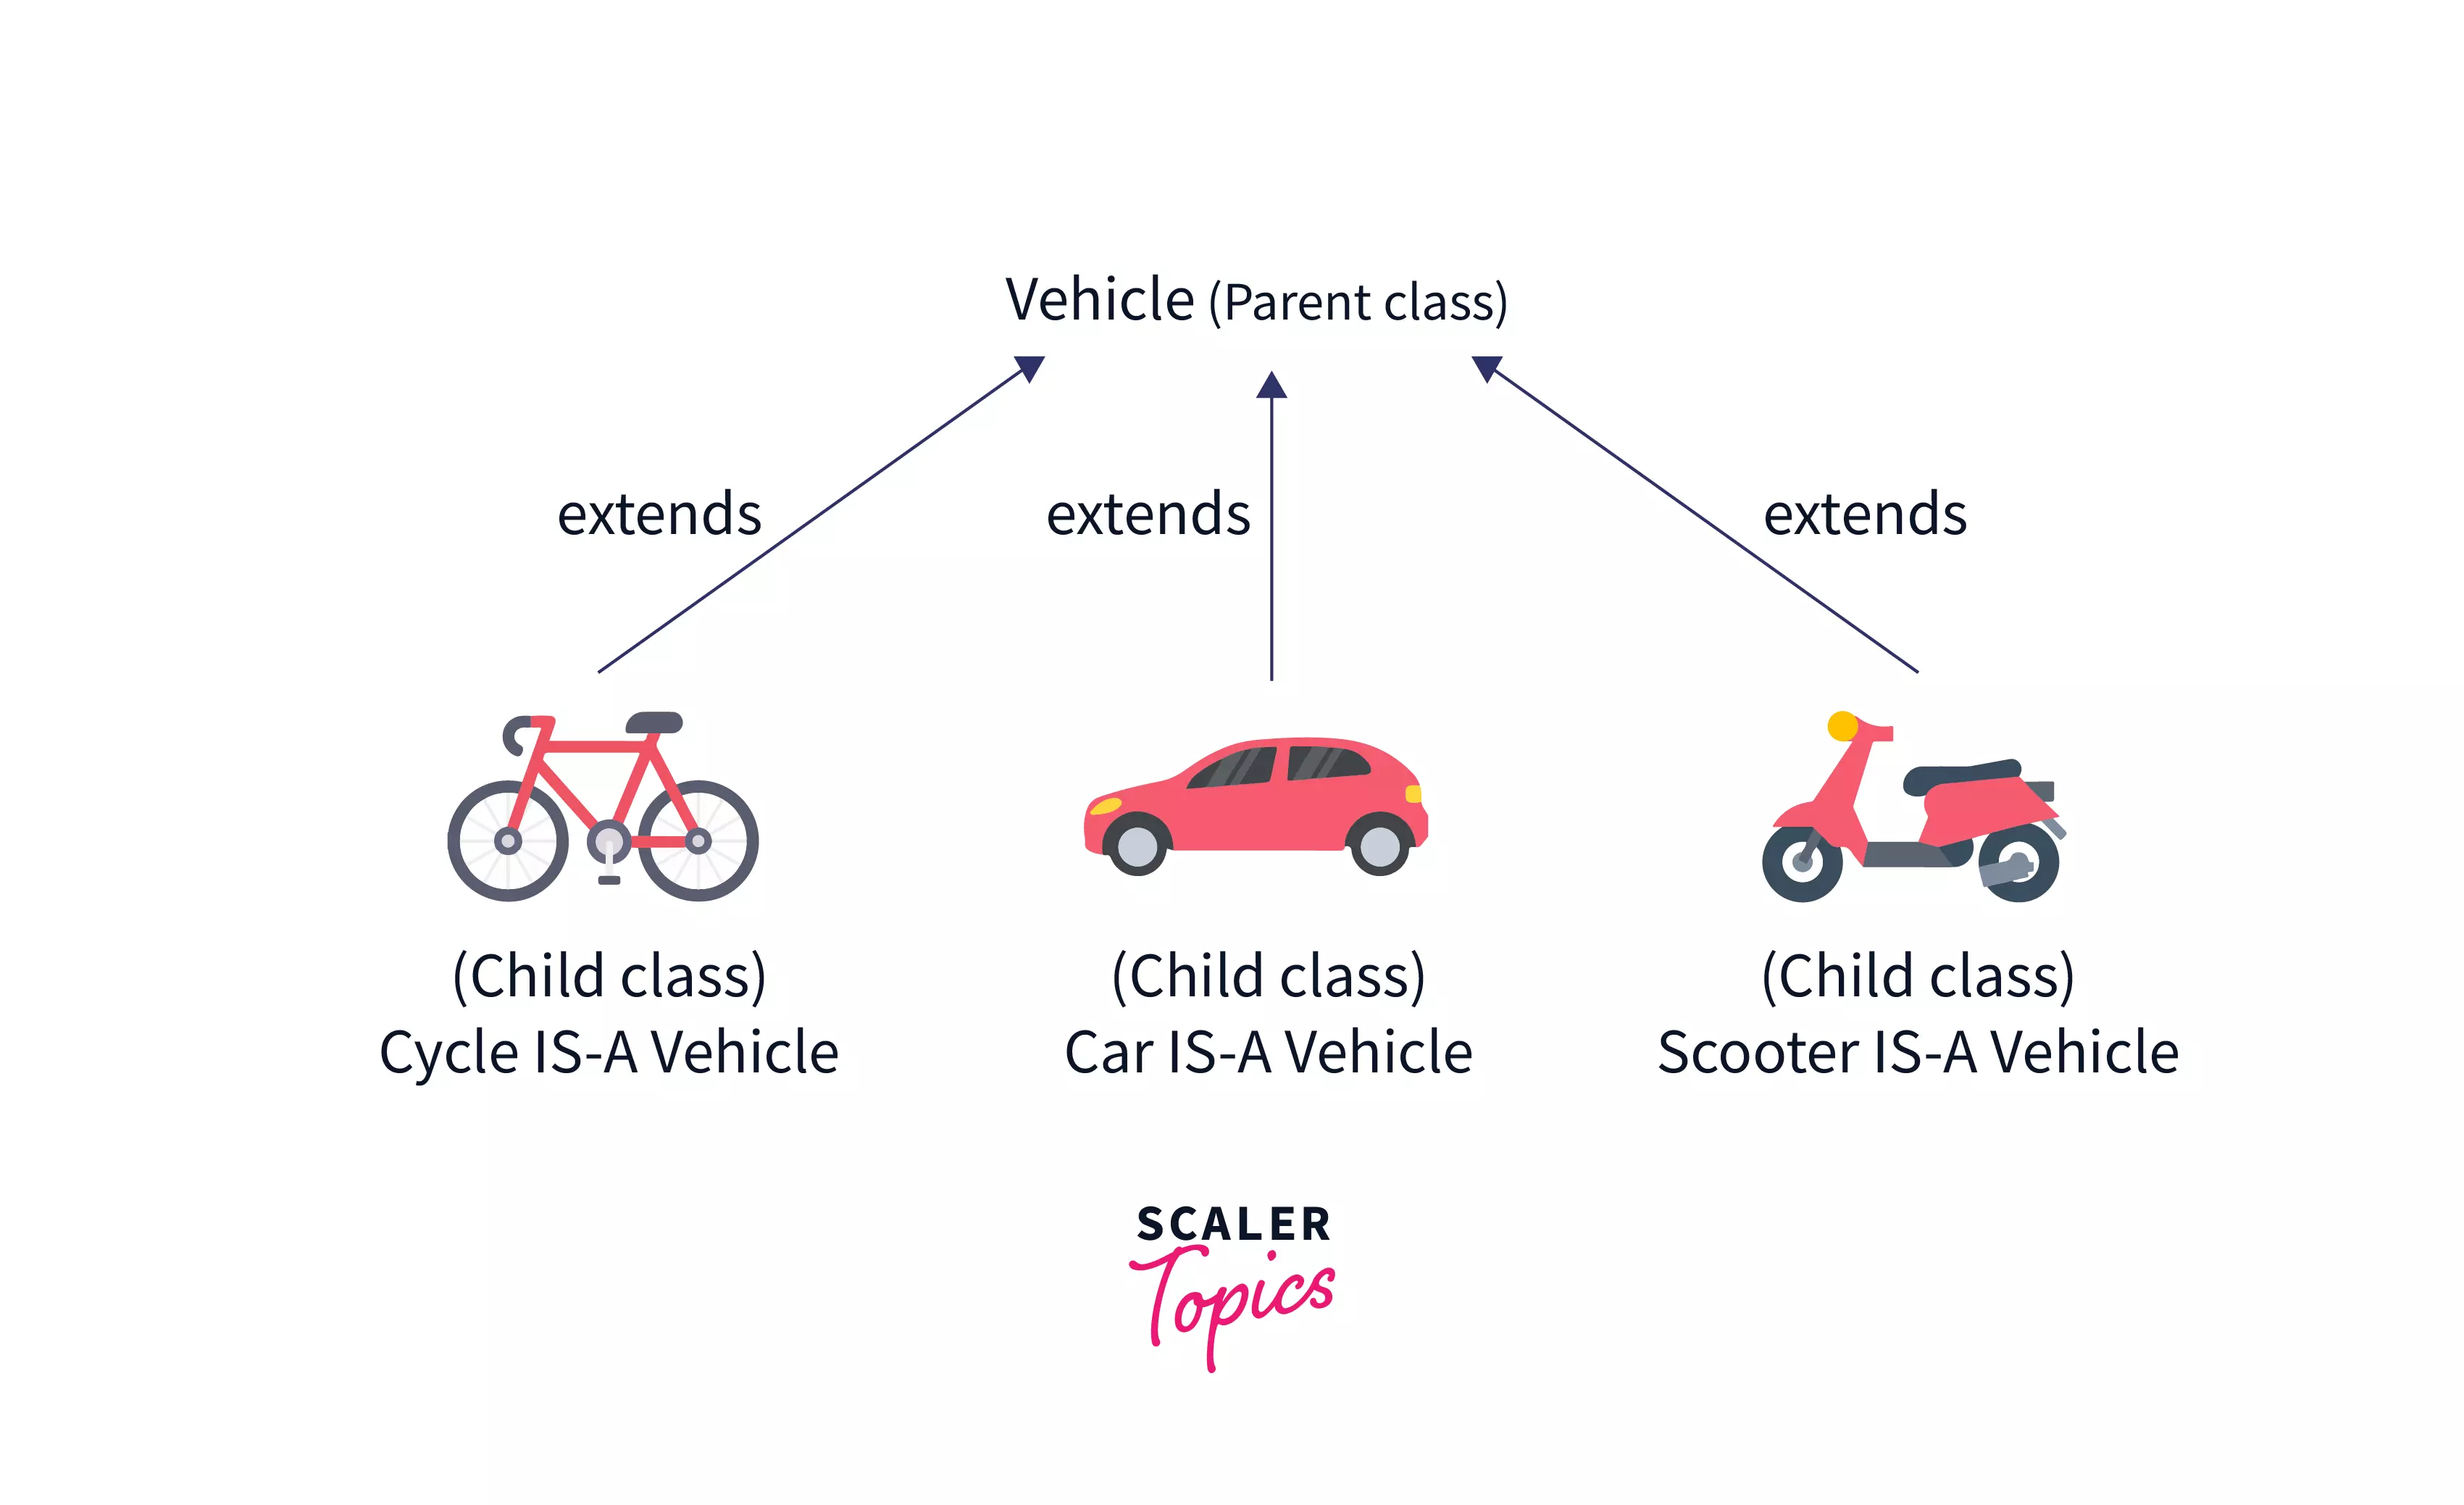 Java Extends Keyword: How to Make Child Classes